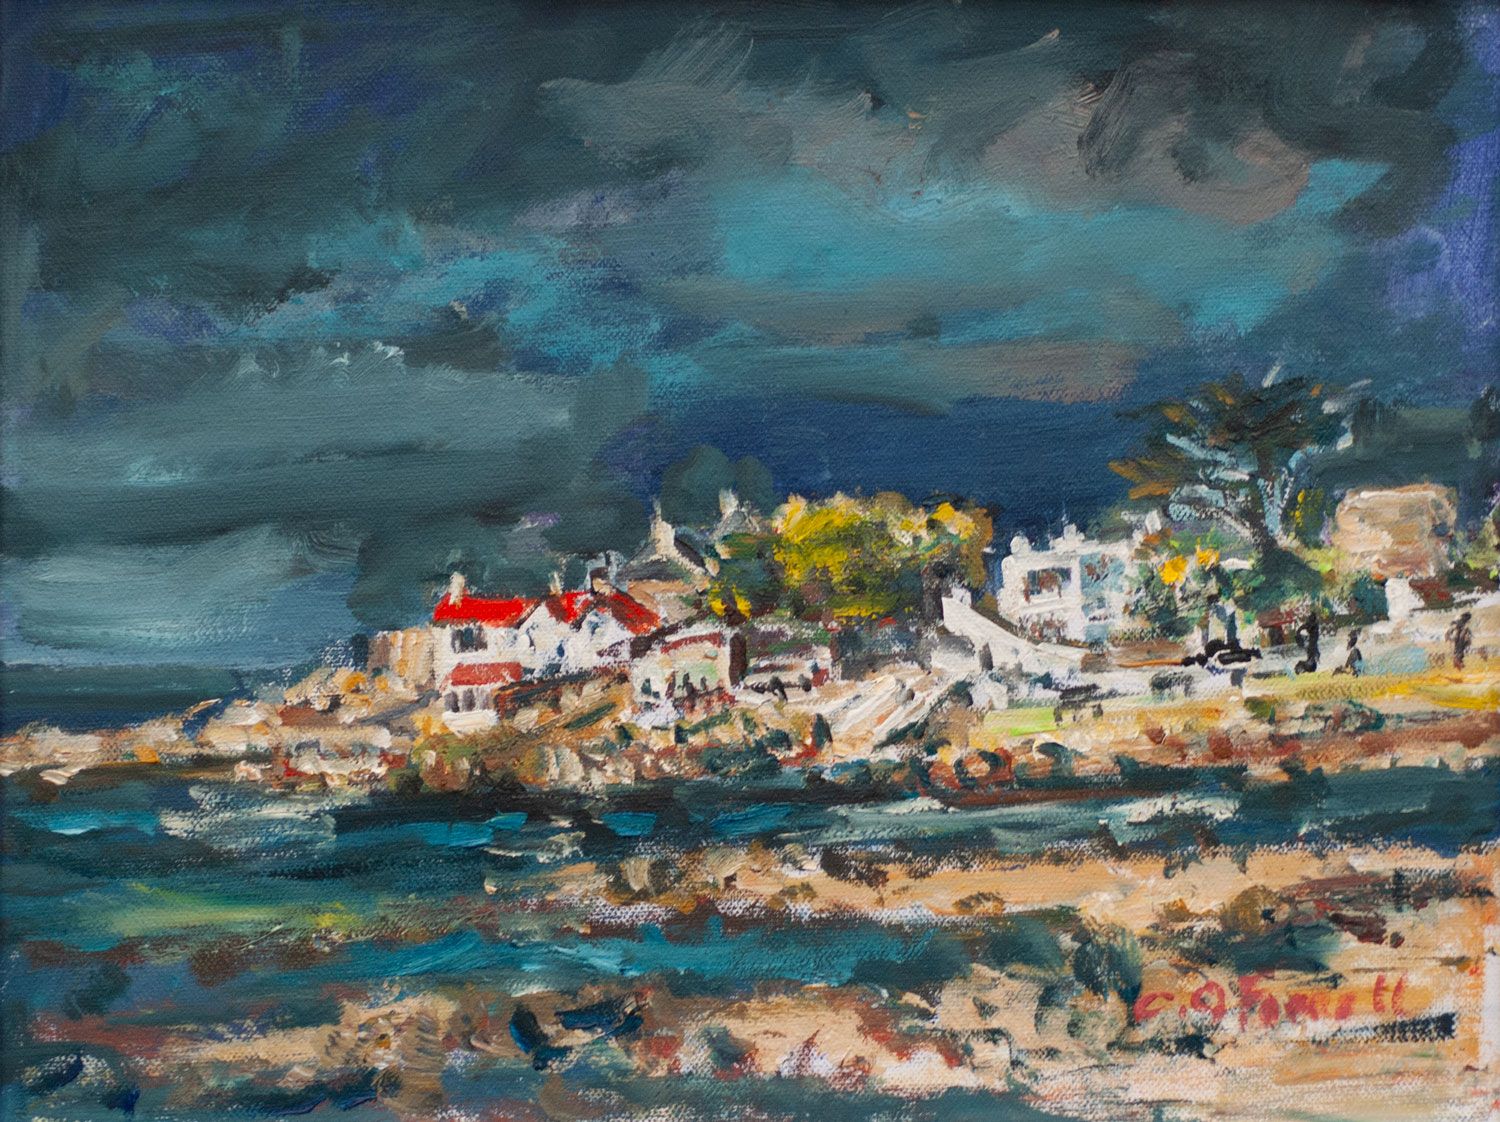 Sandycove by Clare O'Farrell